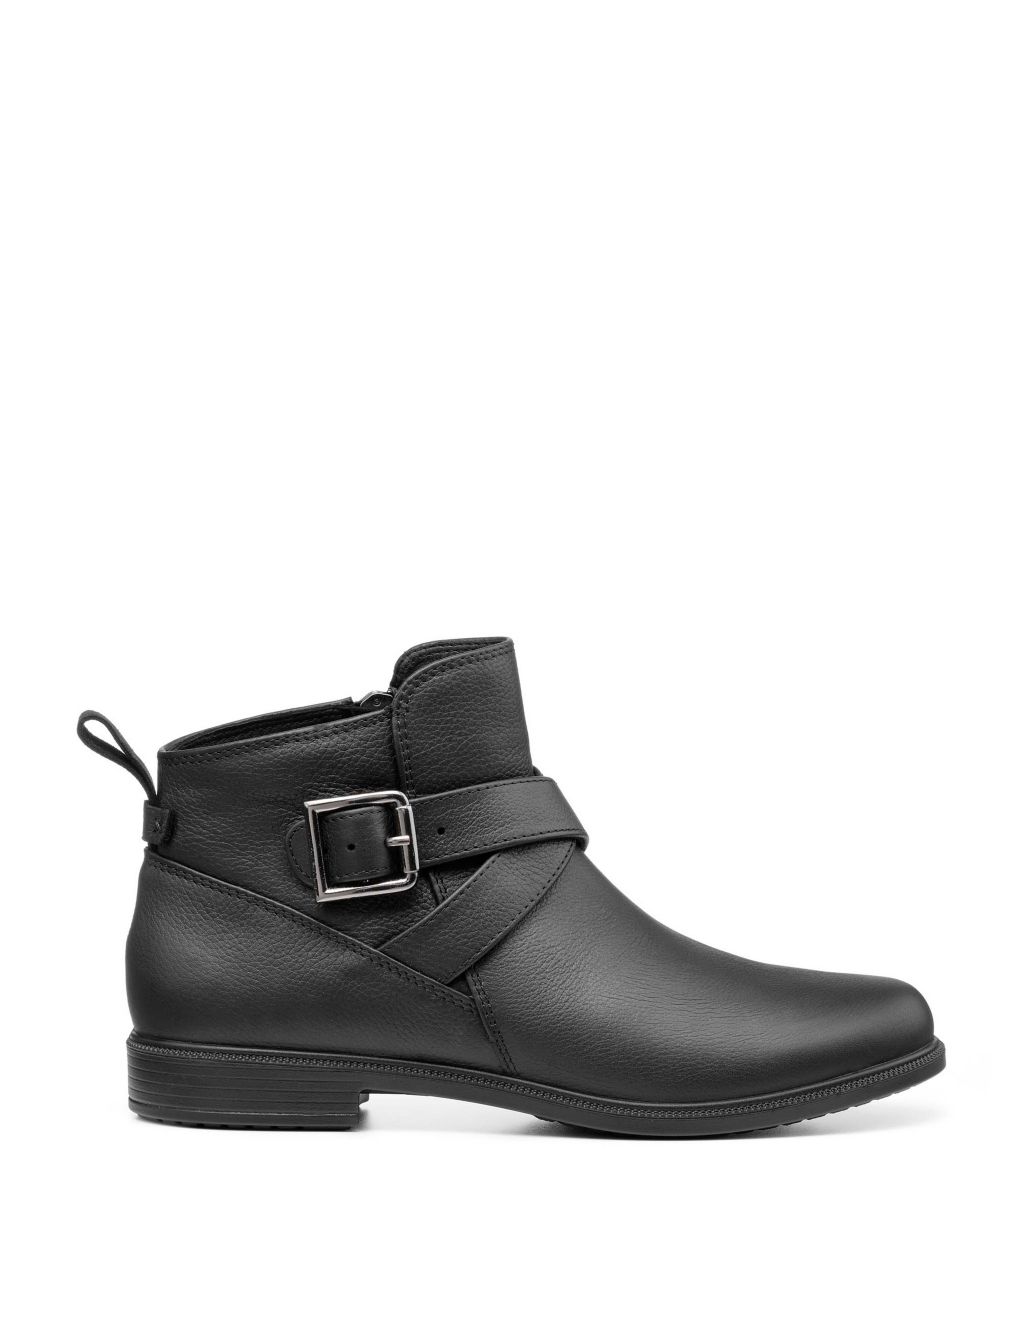 Kingsley Leather Buckle Ankle Boots | Hotter | M&S